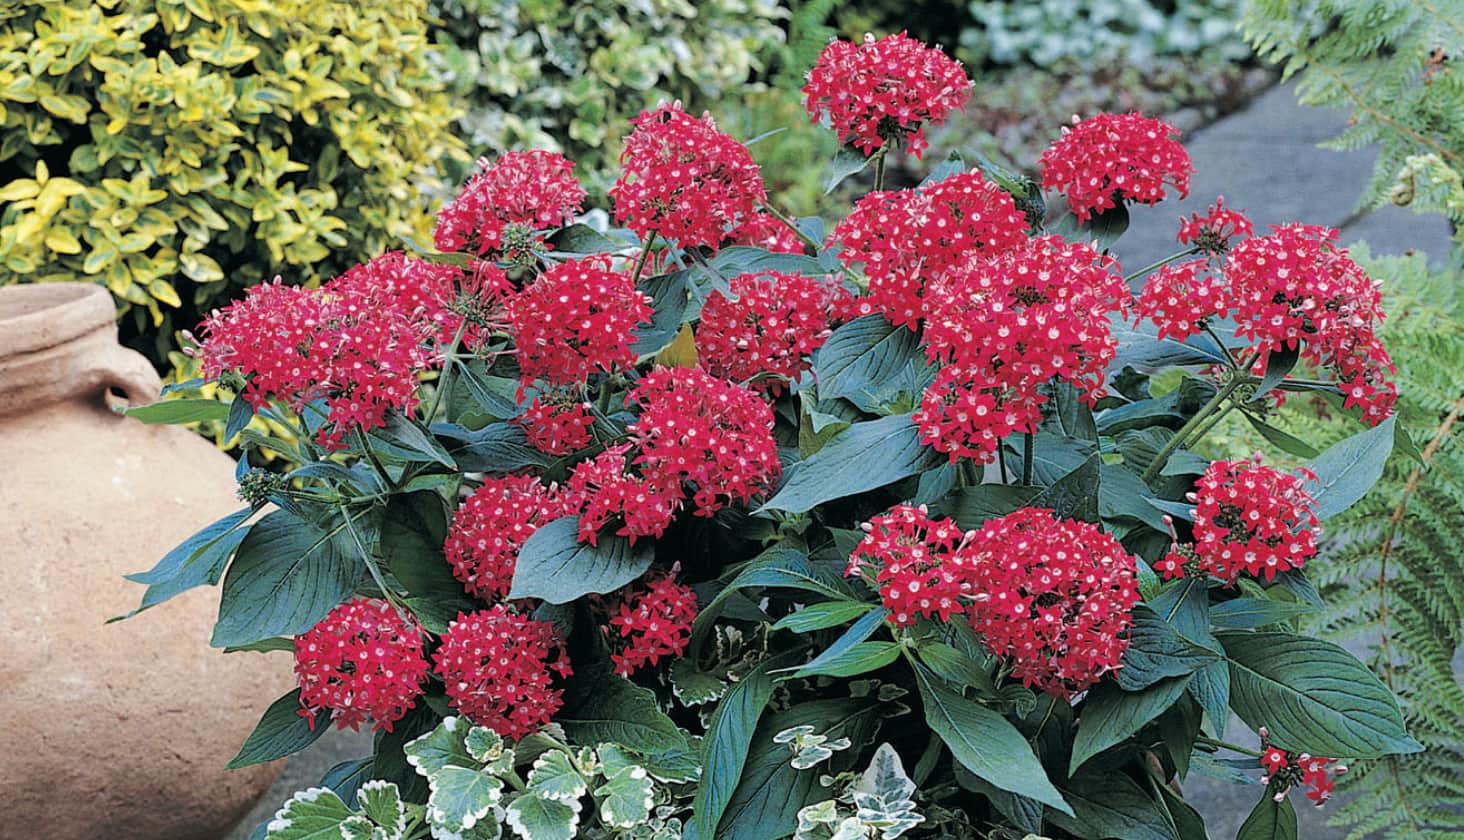 Large red flowers and big green leaves in a garden